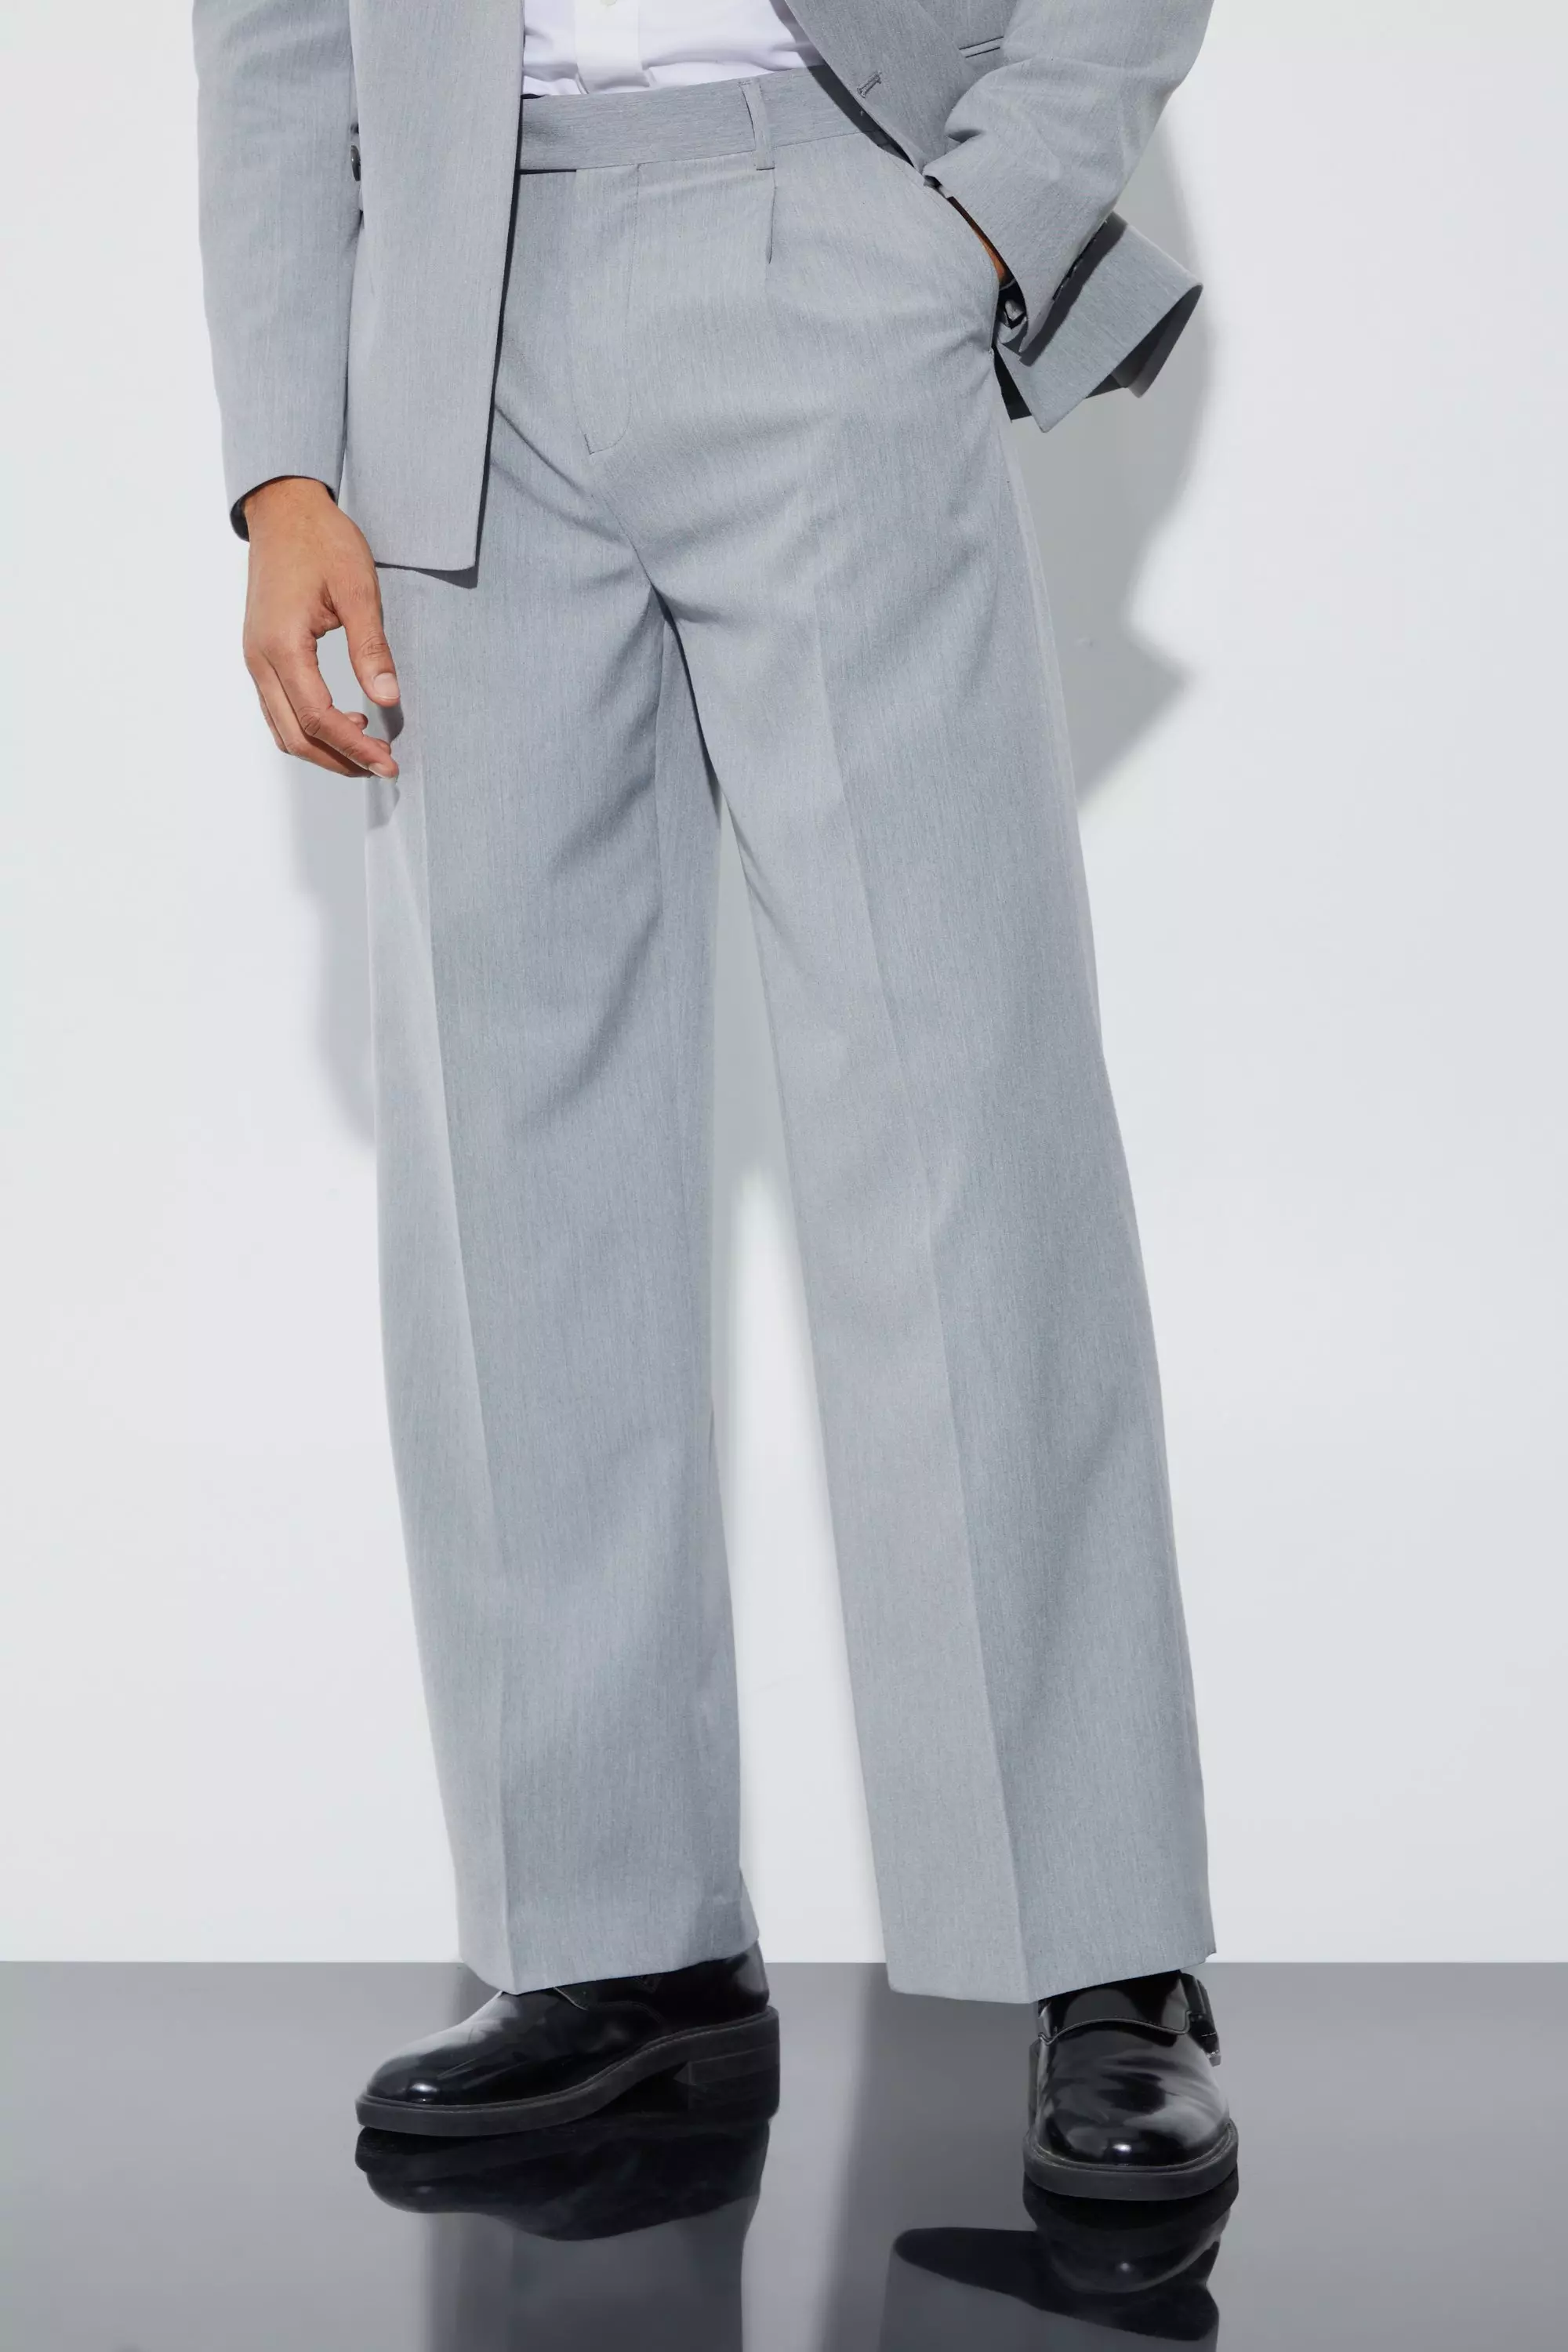 Wide Fit Pleat Front Tailored Pants Grey